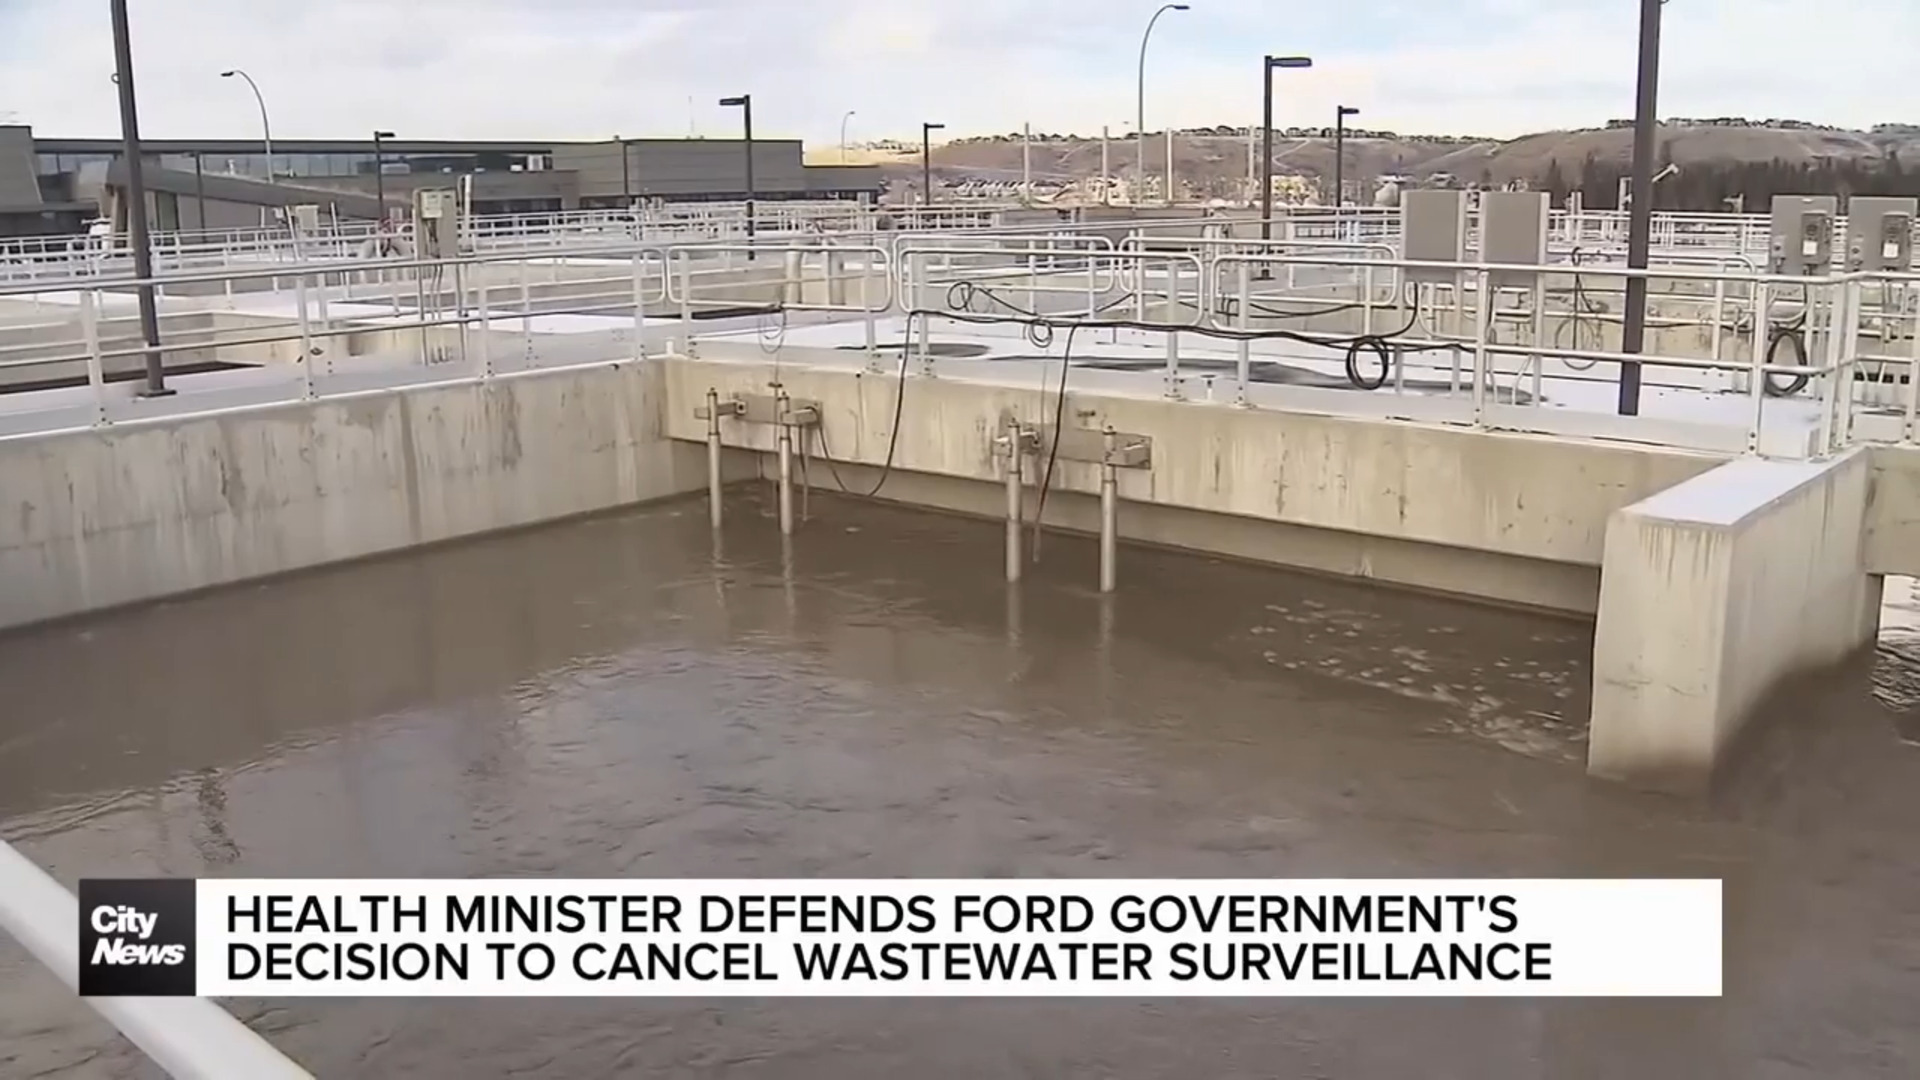 Health Minister defends Ford government's decision to cancel wastewater surveillance